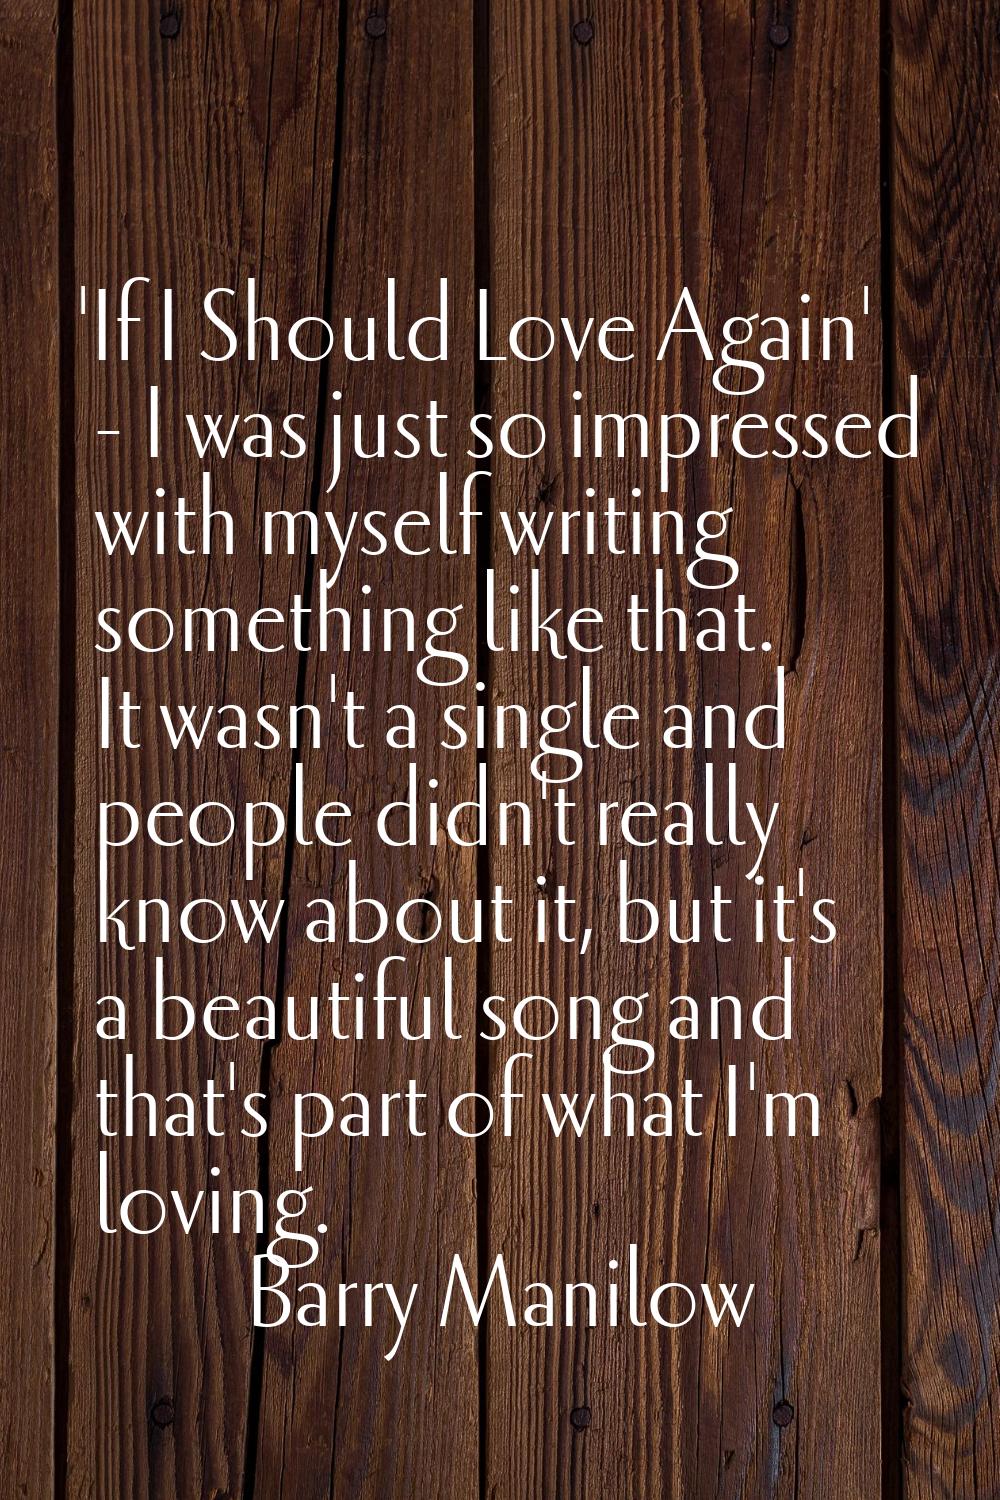 'If I Should Love Again' - I was just so impressed with myself writing something like that. It wasn